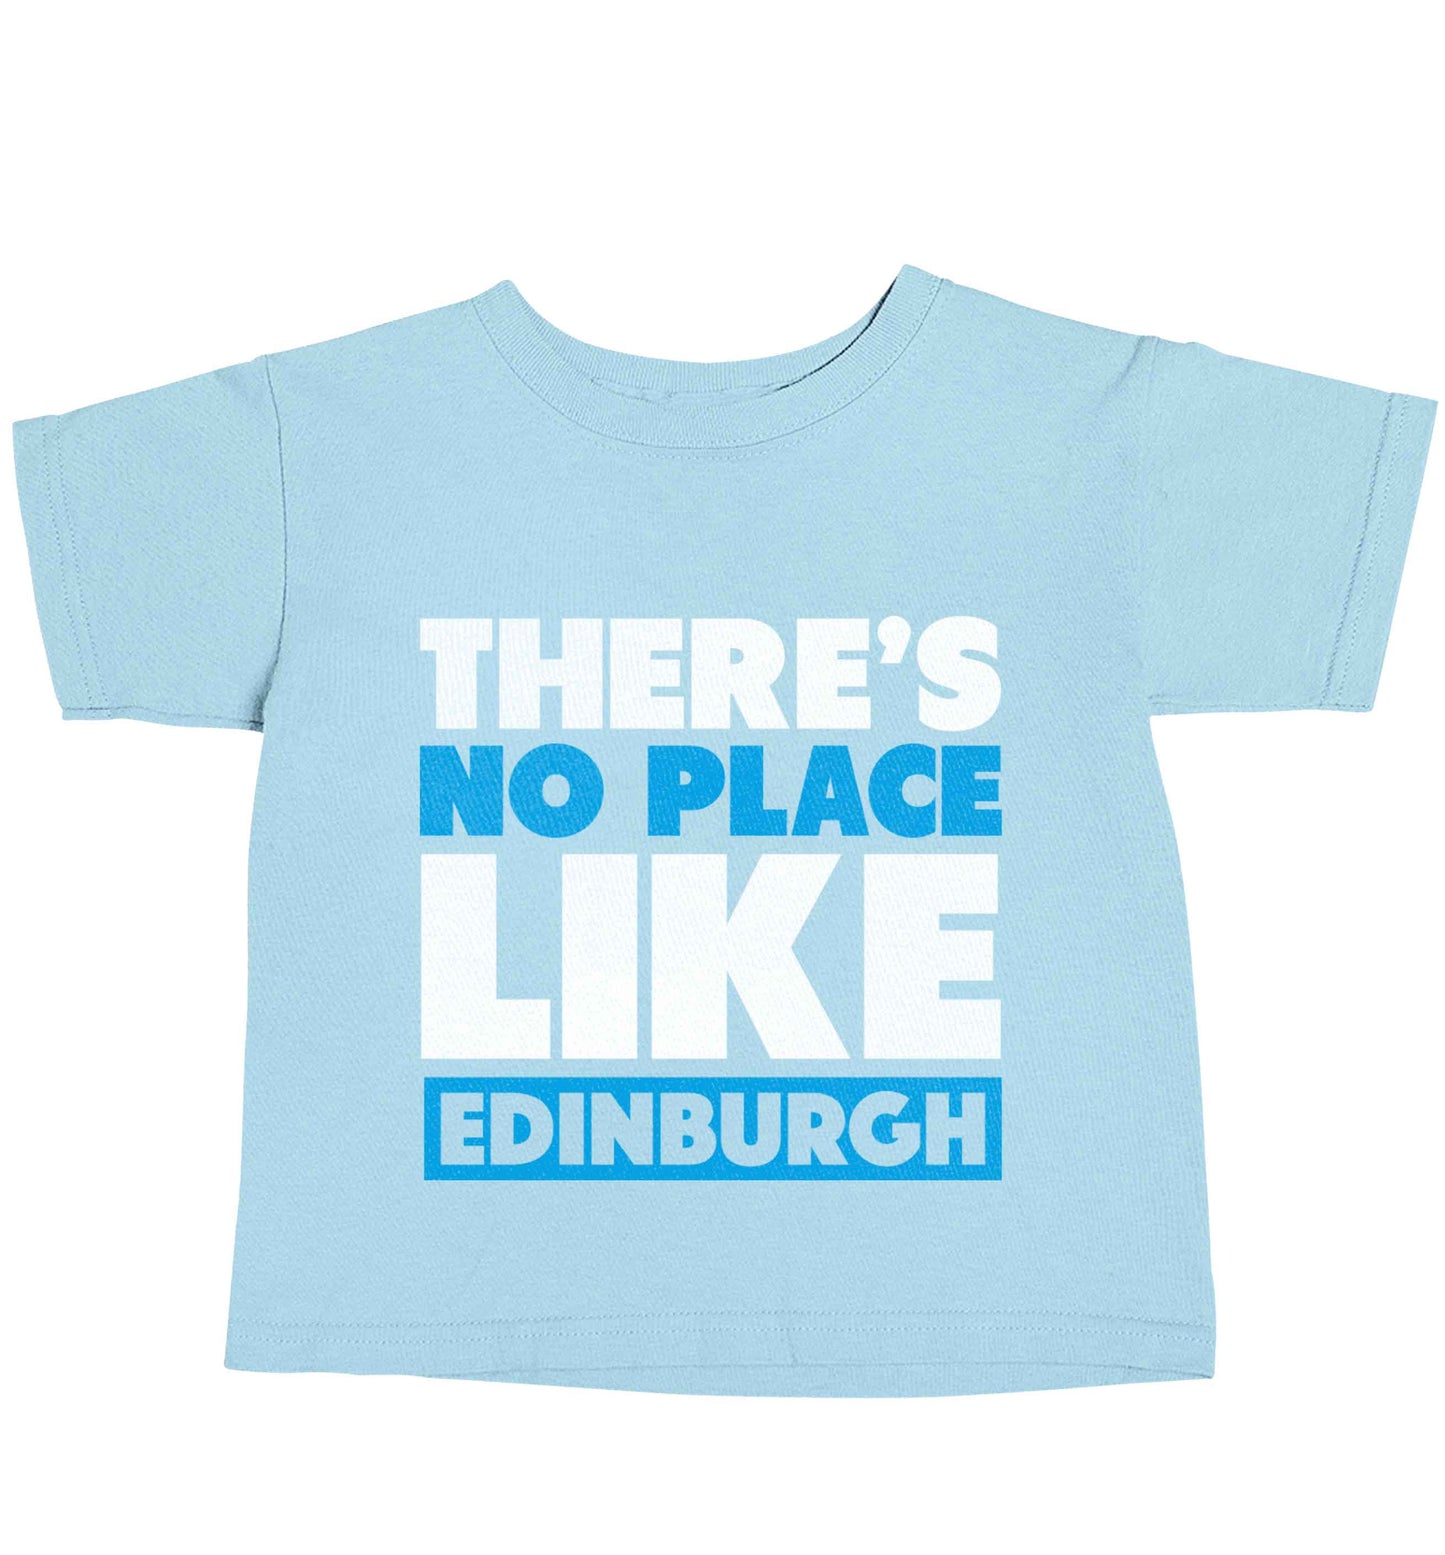 There's no place like Edinburgh light blue baby toddler Tshirt 2 Years